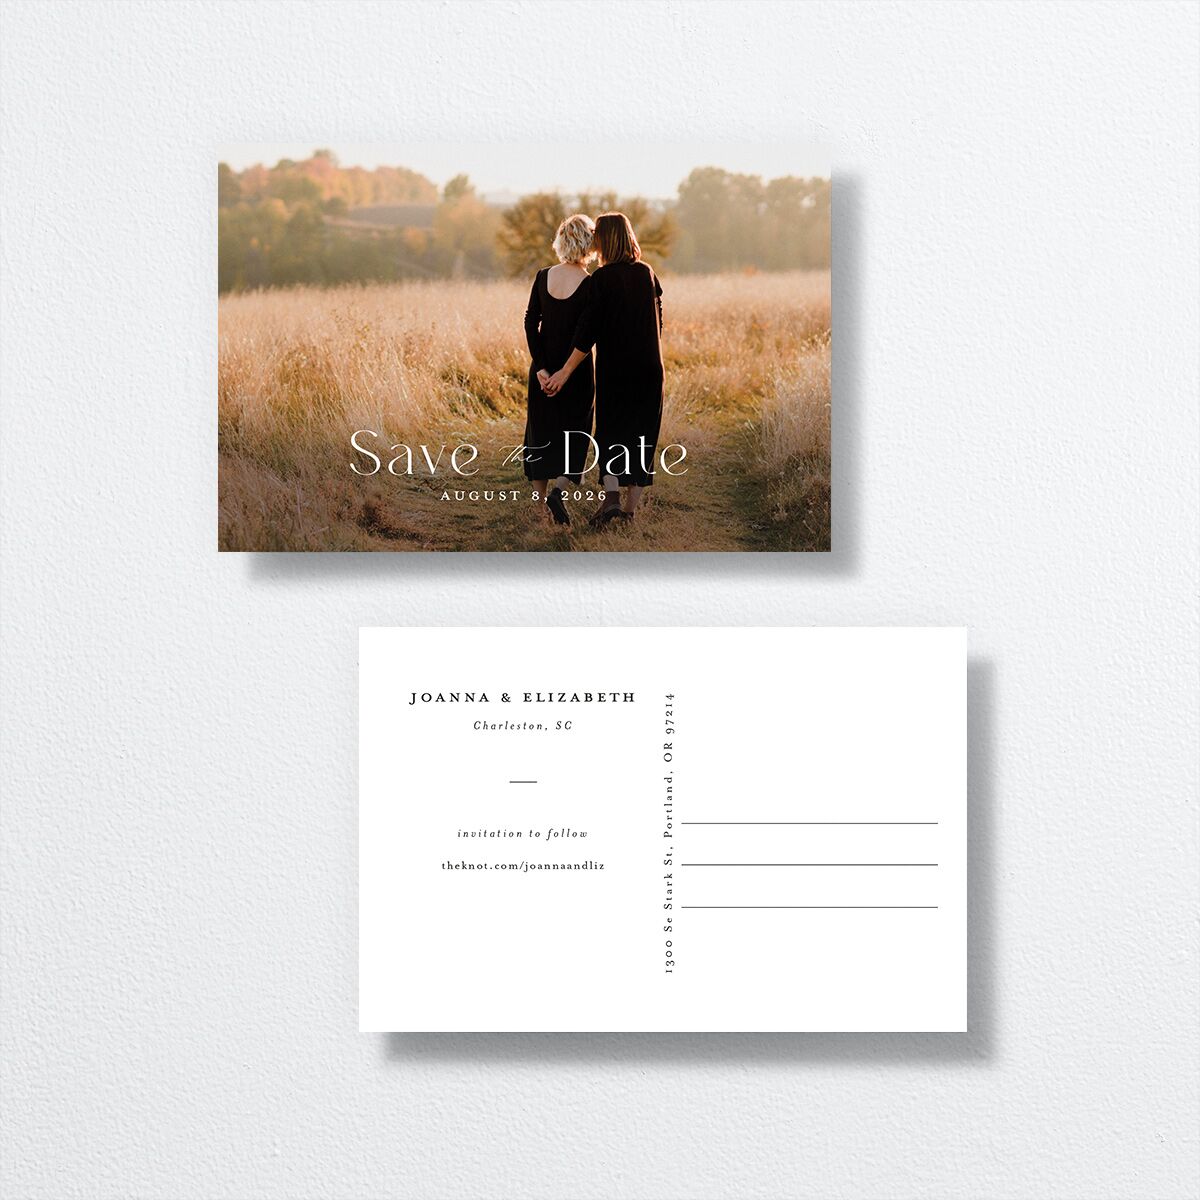 Refined Save The Date Postcards front-and-back in white